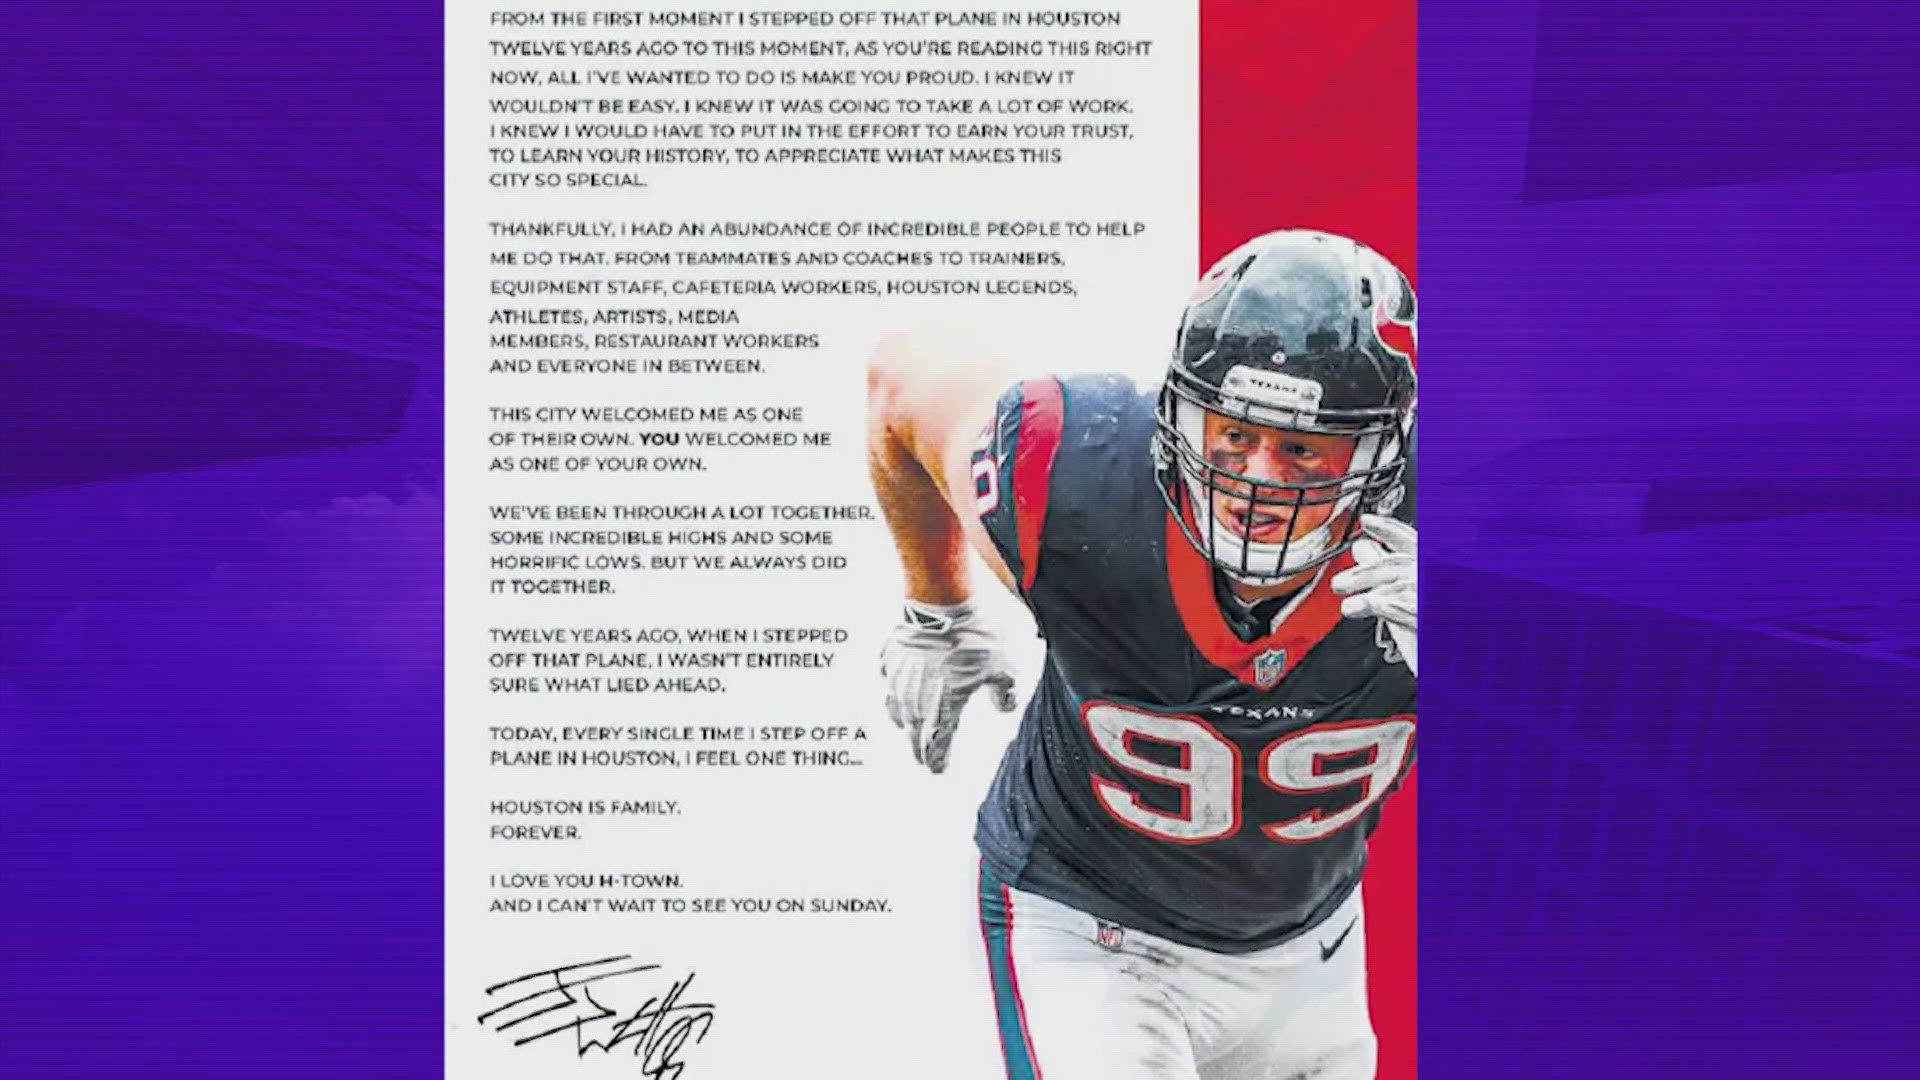 Watt told fans that all he ever wanted to do is to make them proud.  Watt will be inducted into the Texans Ring of Honor